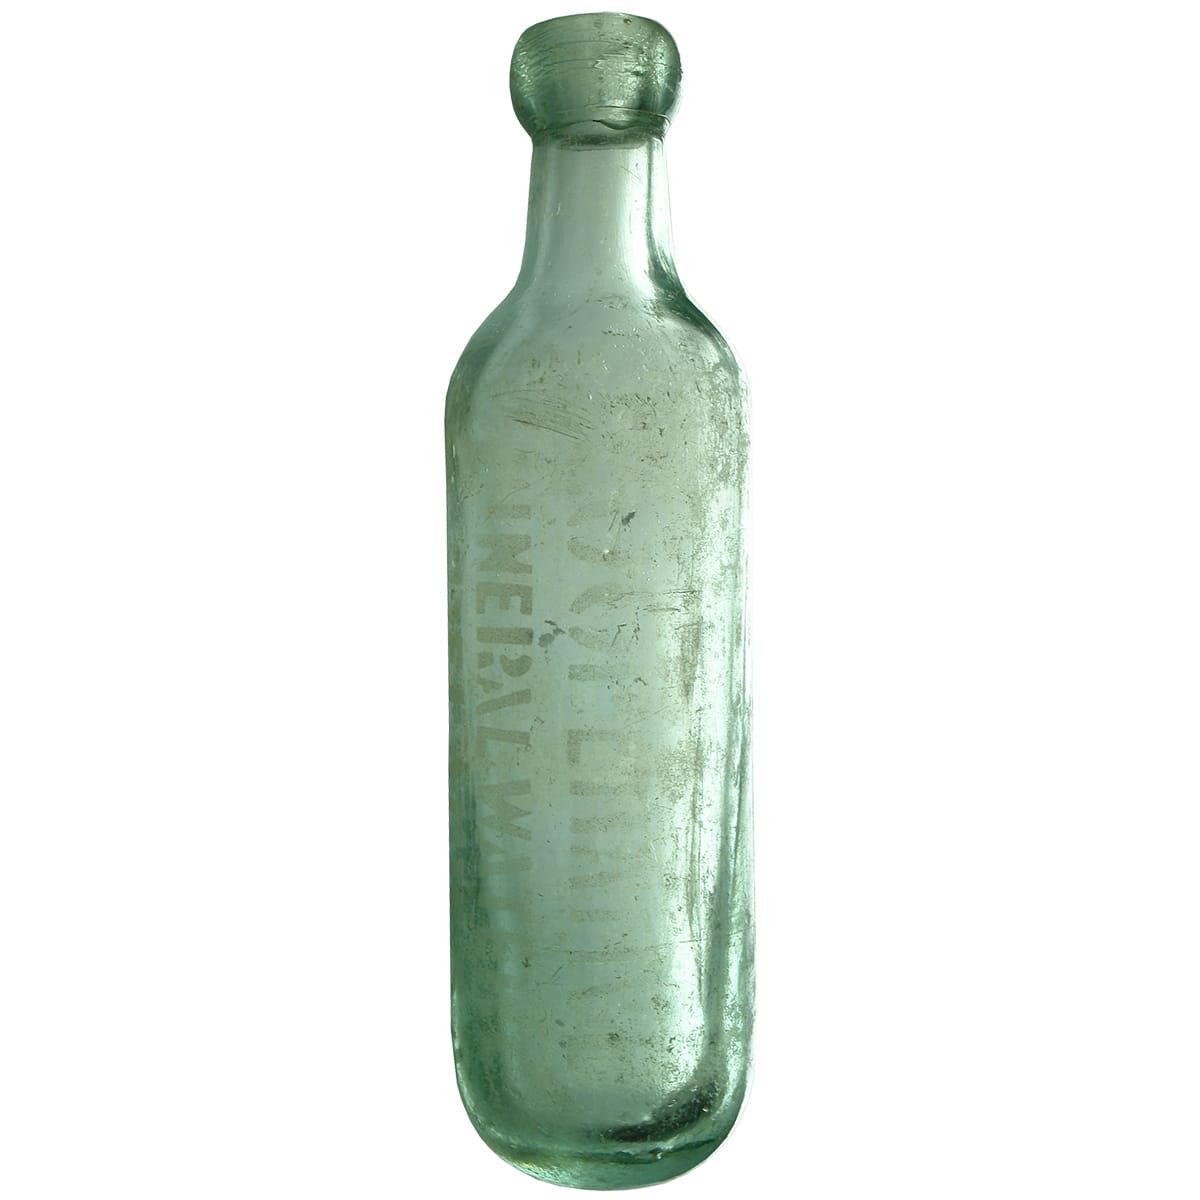 Maugham.  Co-Operative Mineral Water Co, Adelaide.  Fat body.  Sand blasted.  Aqua.  10 oz.